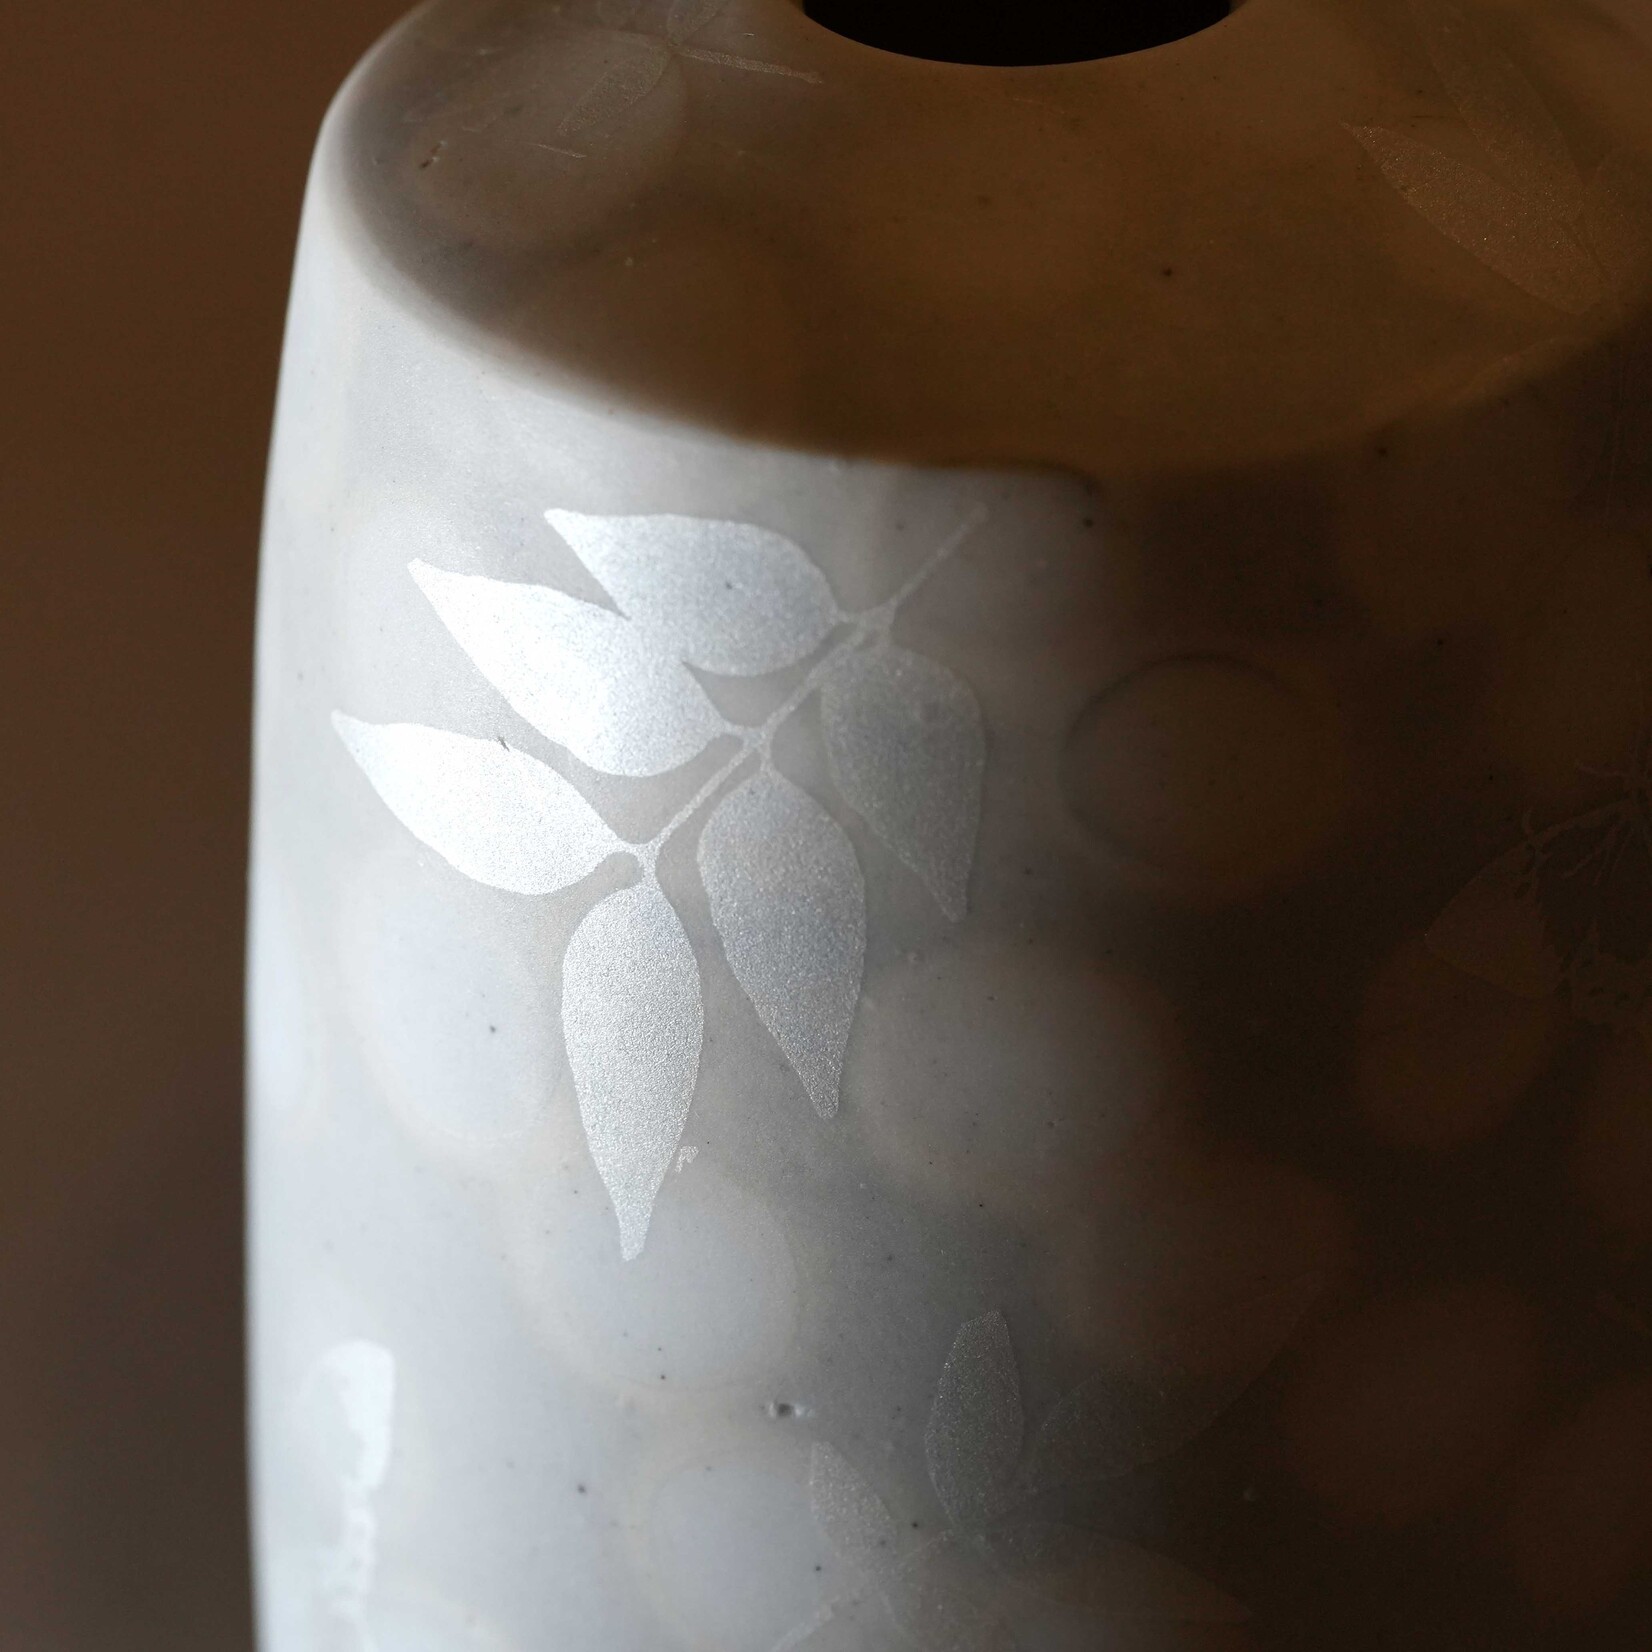 Mollie Bosworth, Pale Bud Vase with Silver Decals | Porcelain